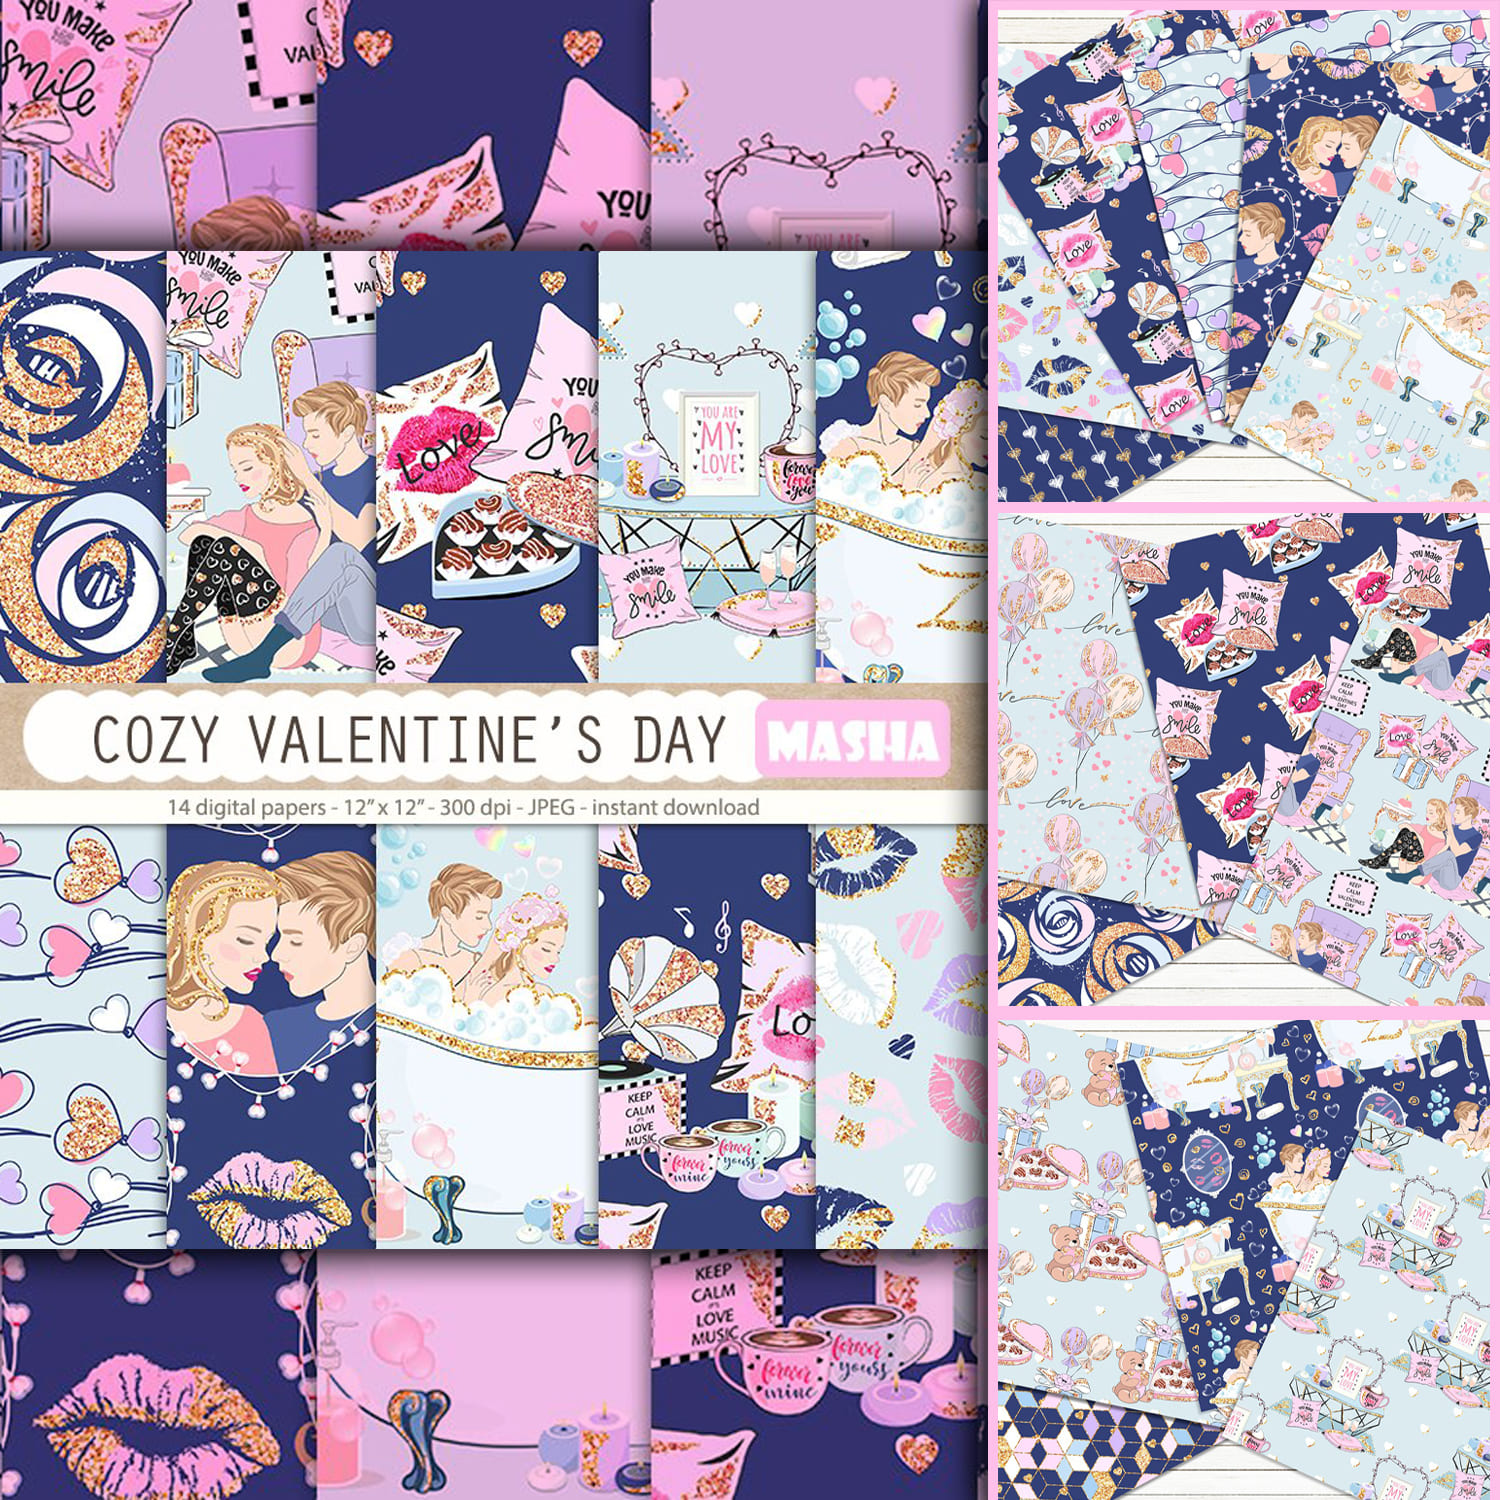 Romantic dates are depicted on patterns with a cozy celebration of Valentine's Day.